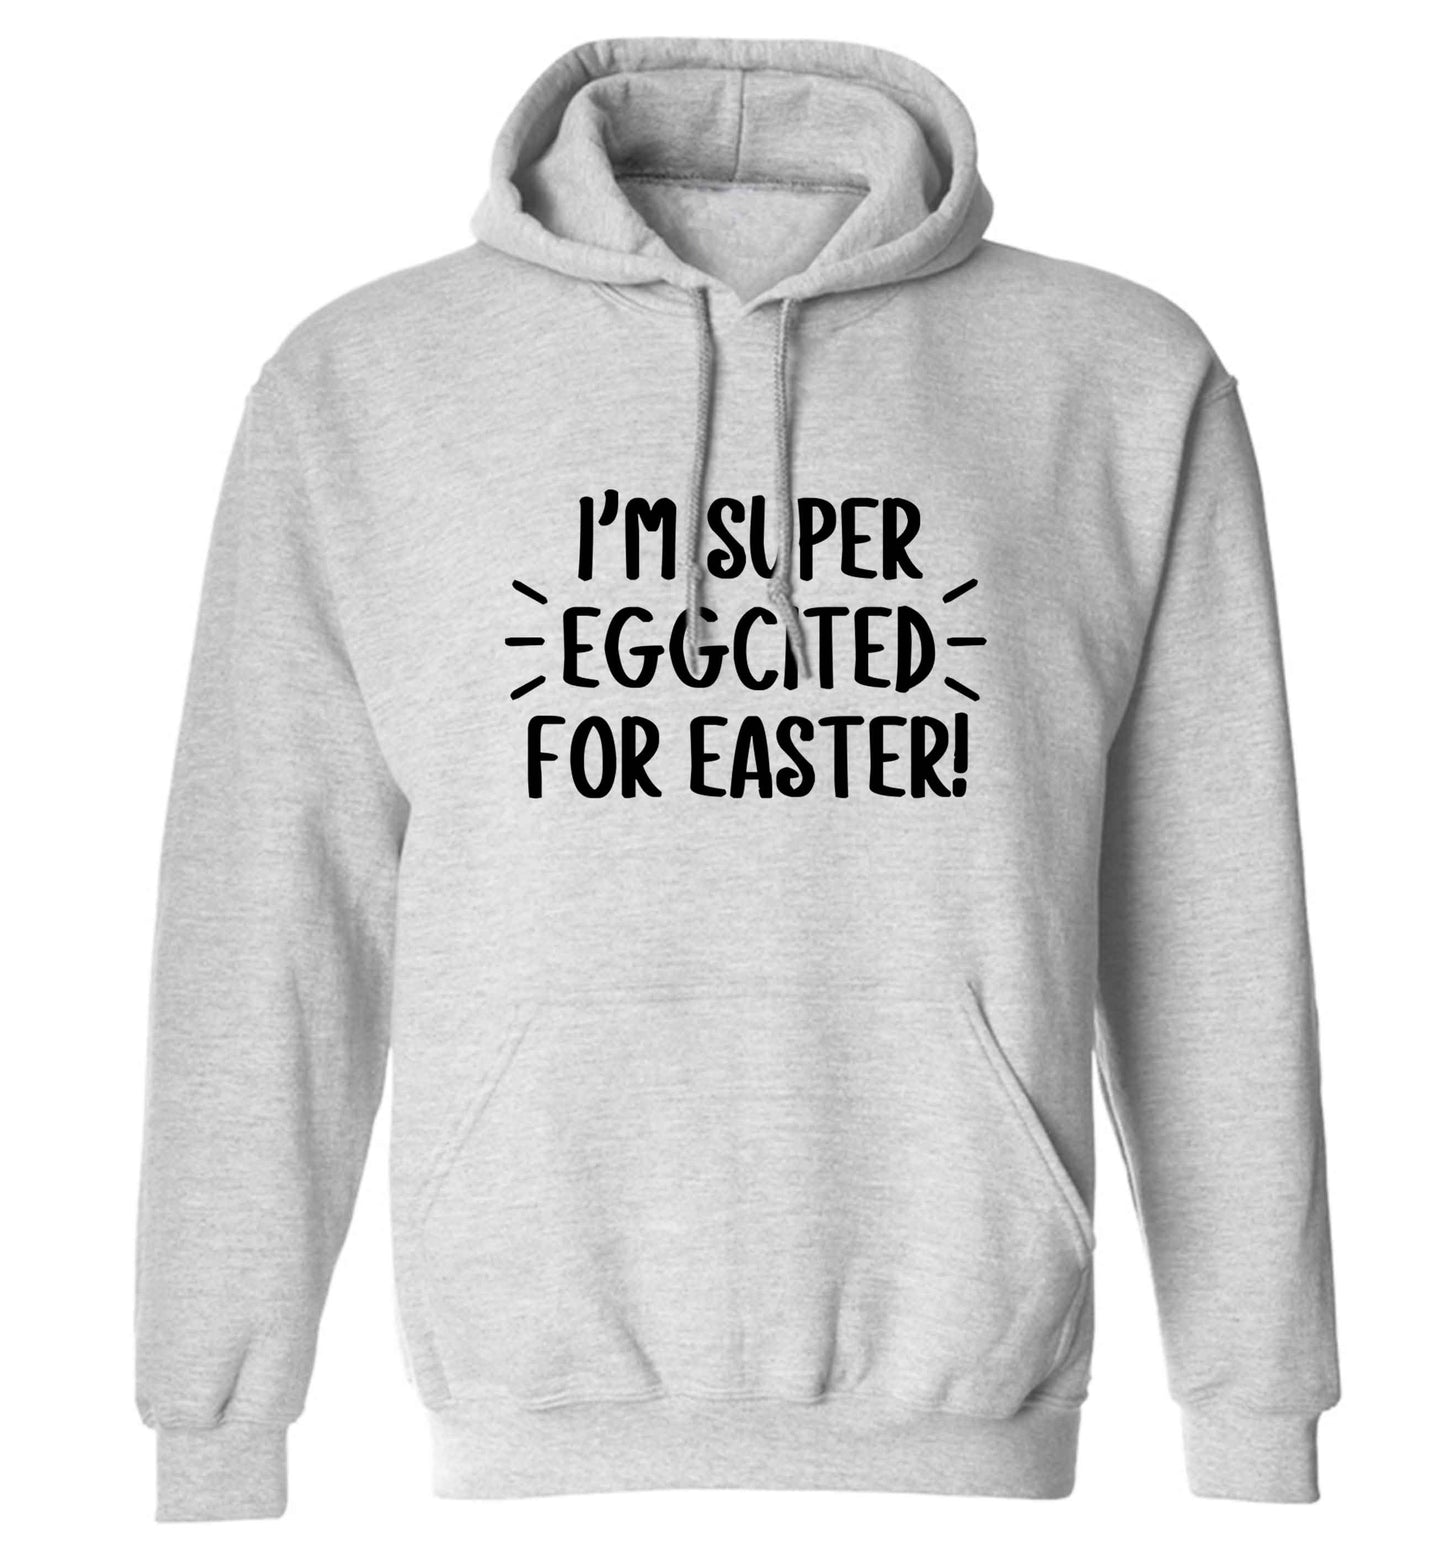 I'm super eggcited for Easter adults unisex grey hoodie 2XL